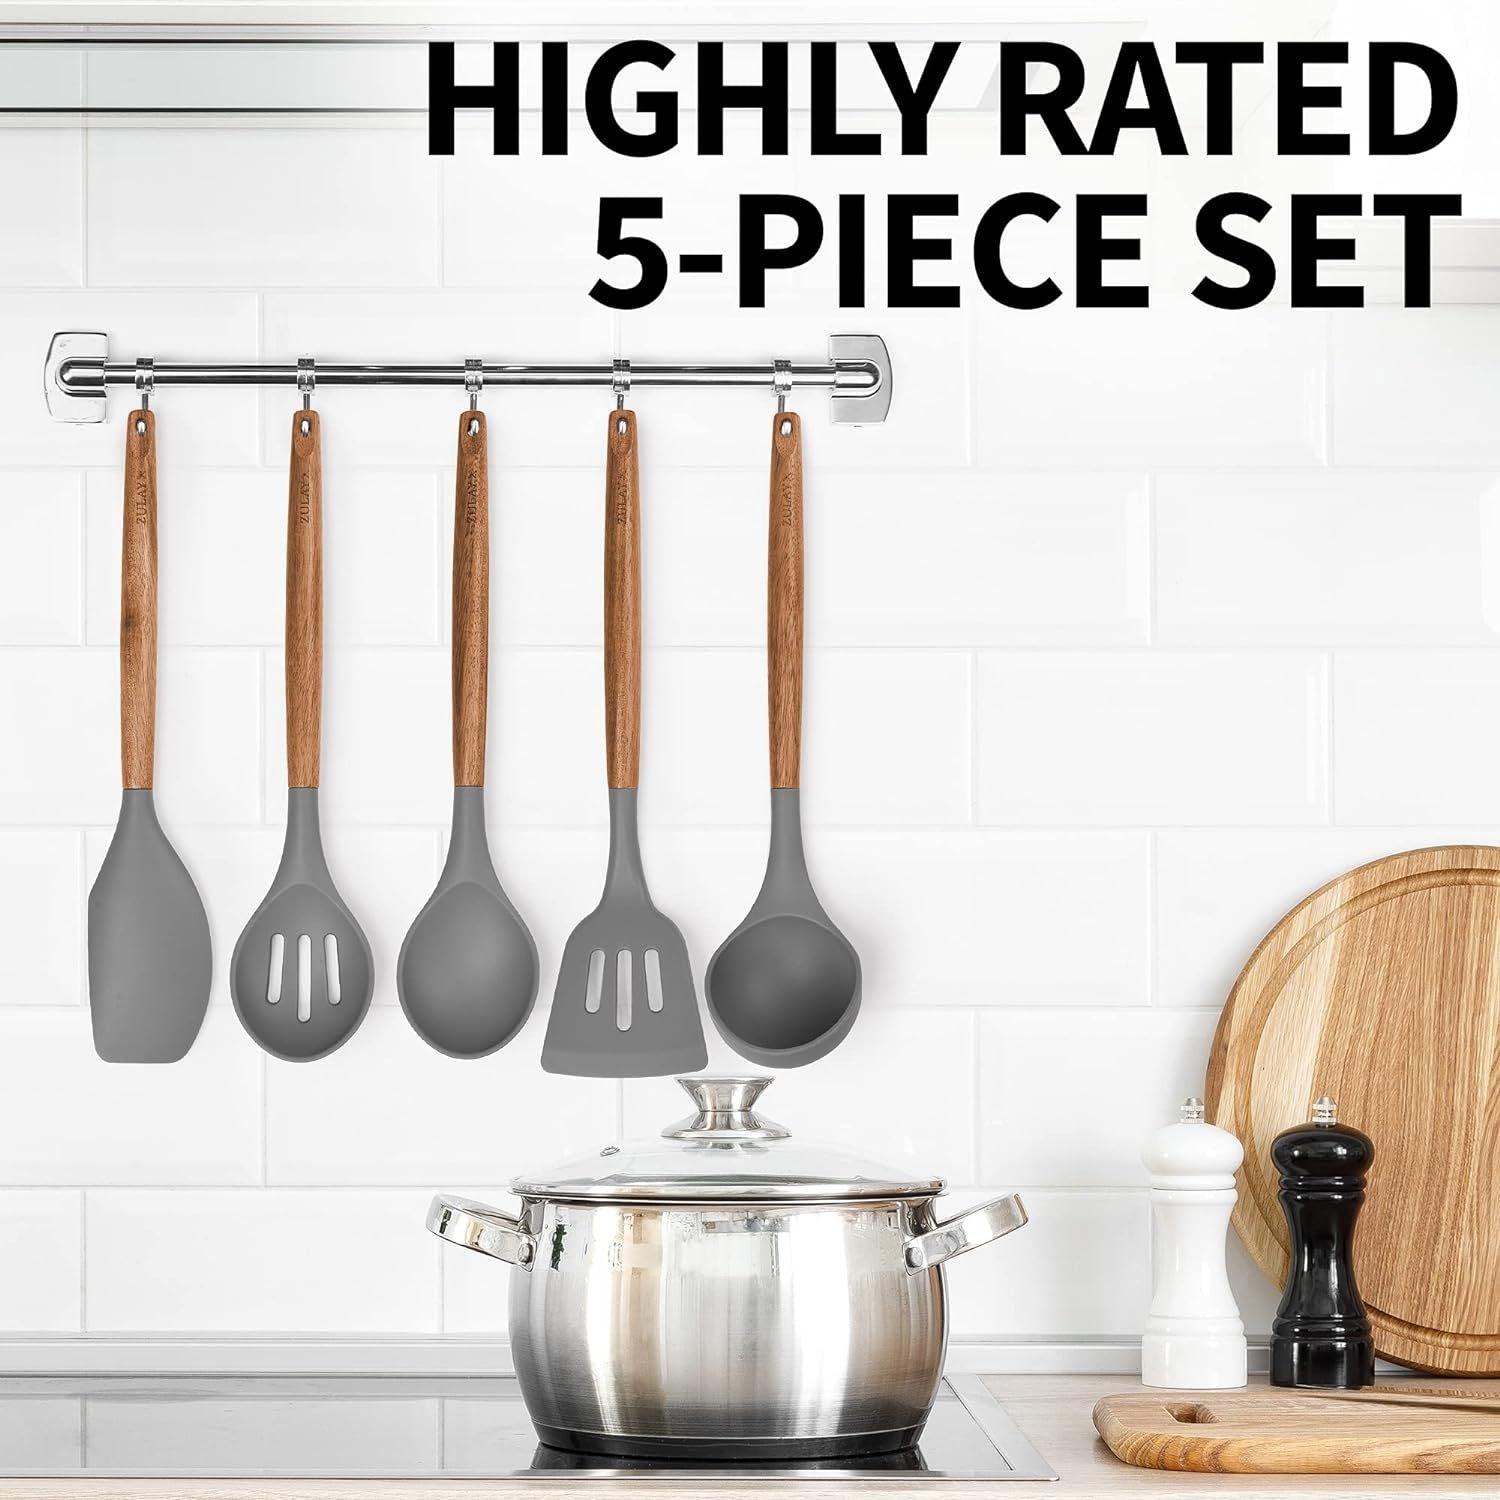 Zulay Kitchen Non-Stick Silicone Utensils Set with Acacia Wood Handles 5 Piece Silicone - Blue